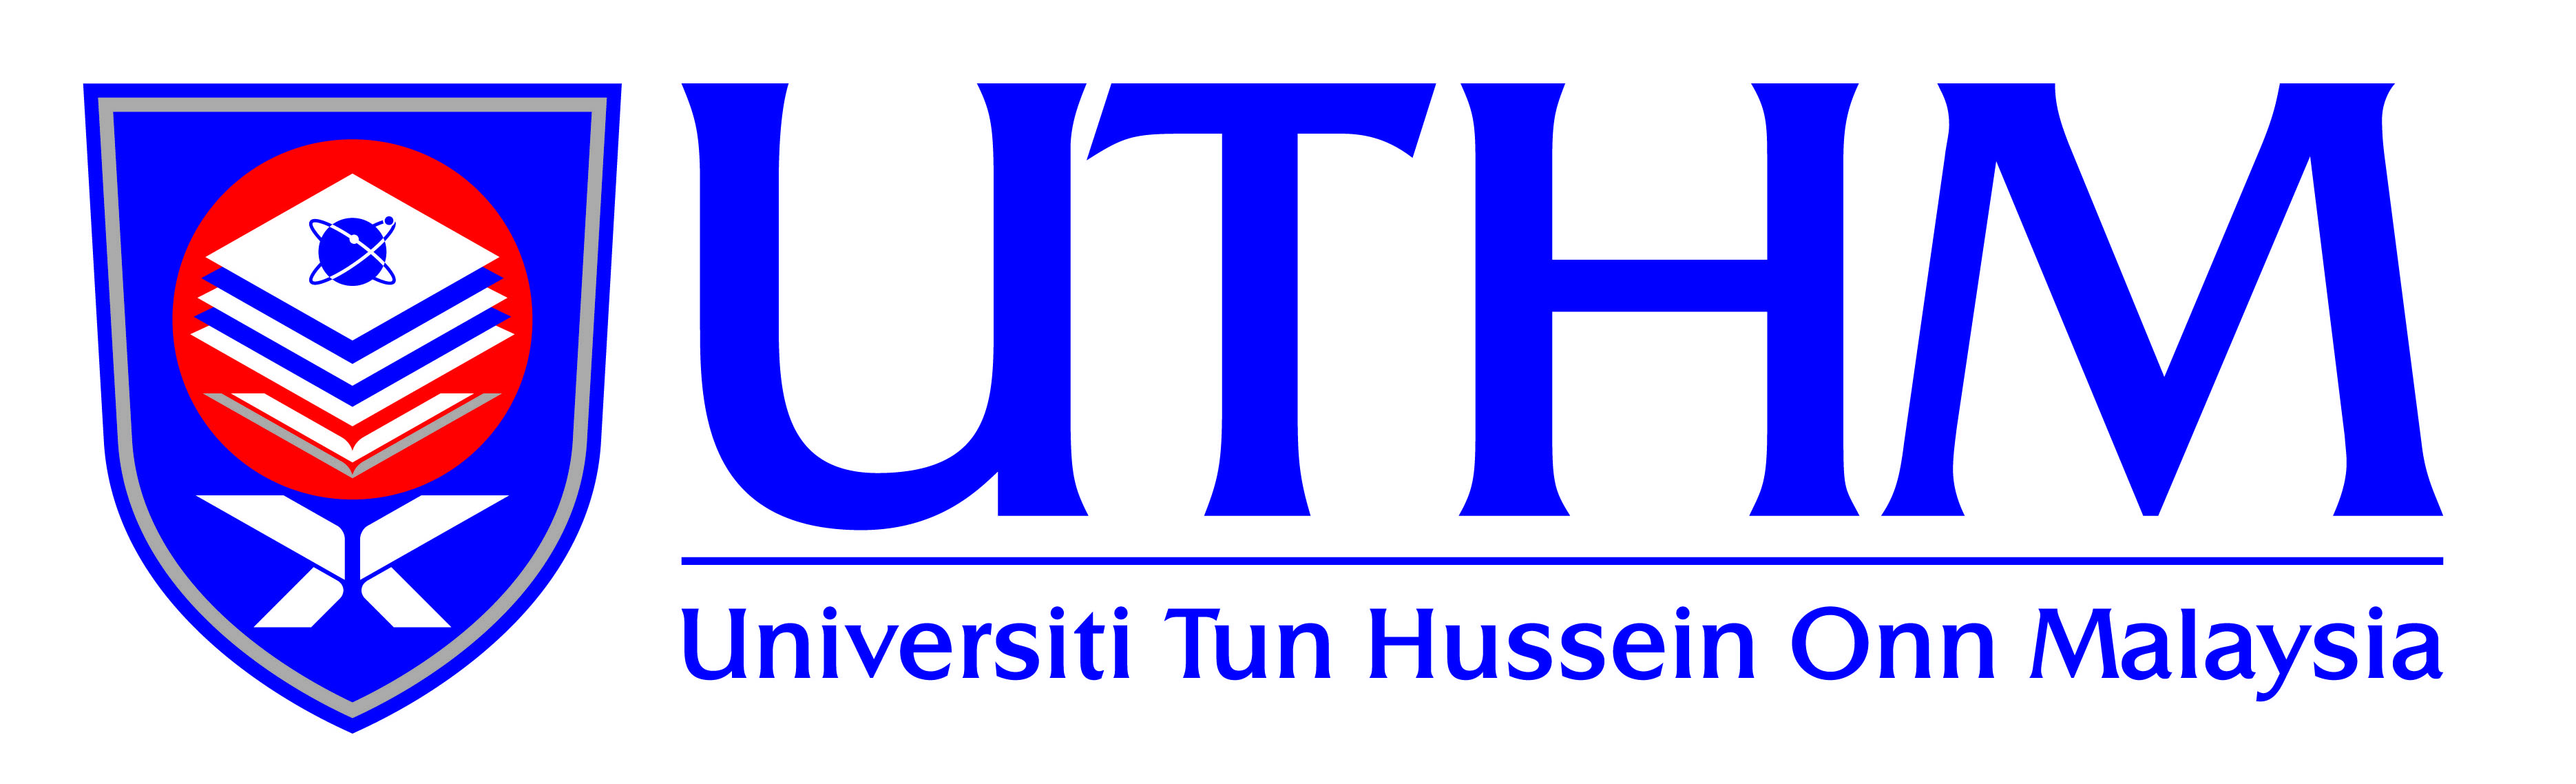 UTHM Student Awards 2015 Recognize Students, Clubs and Associations Excellence